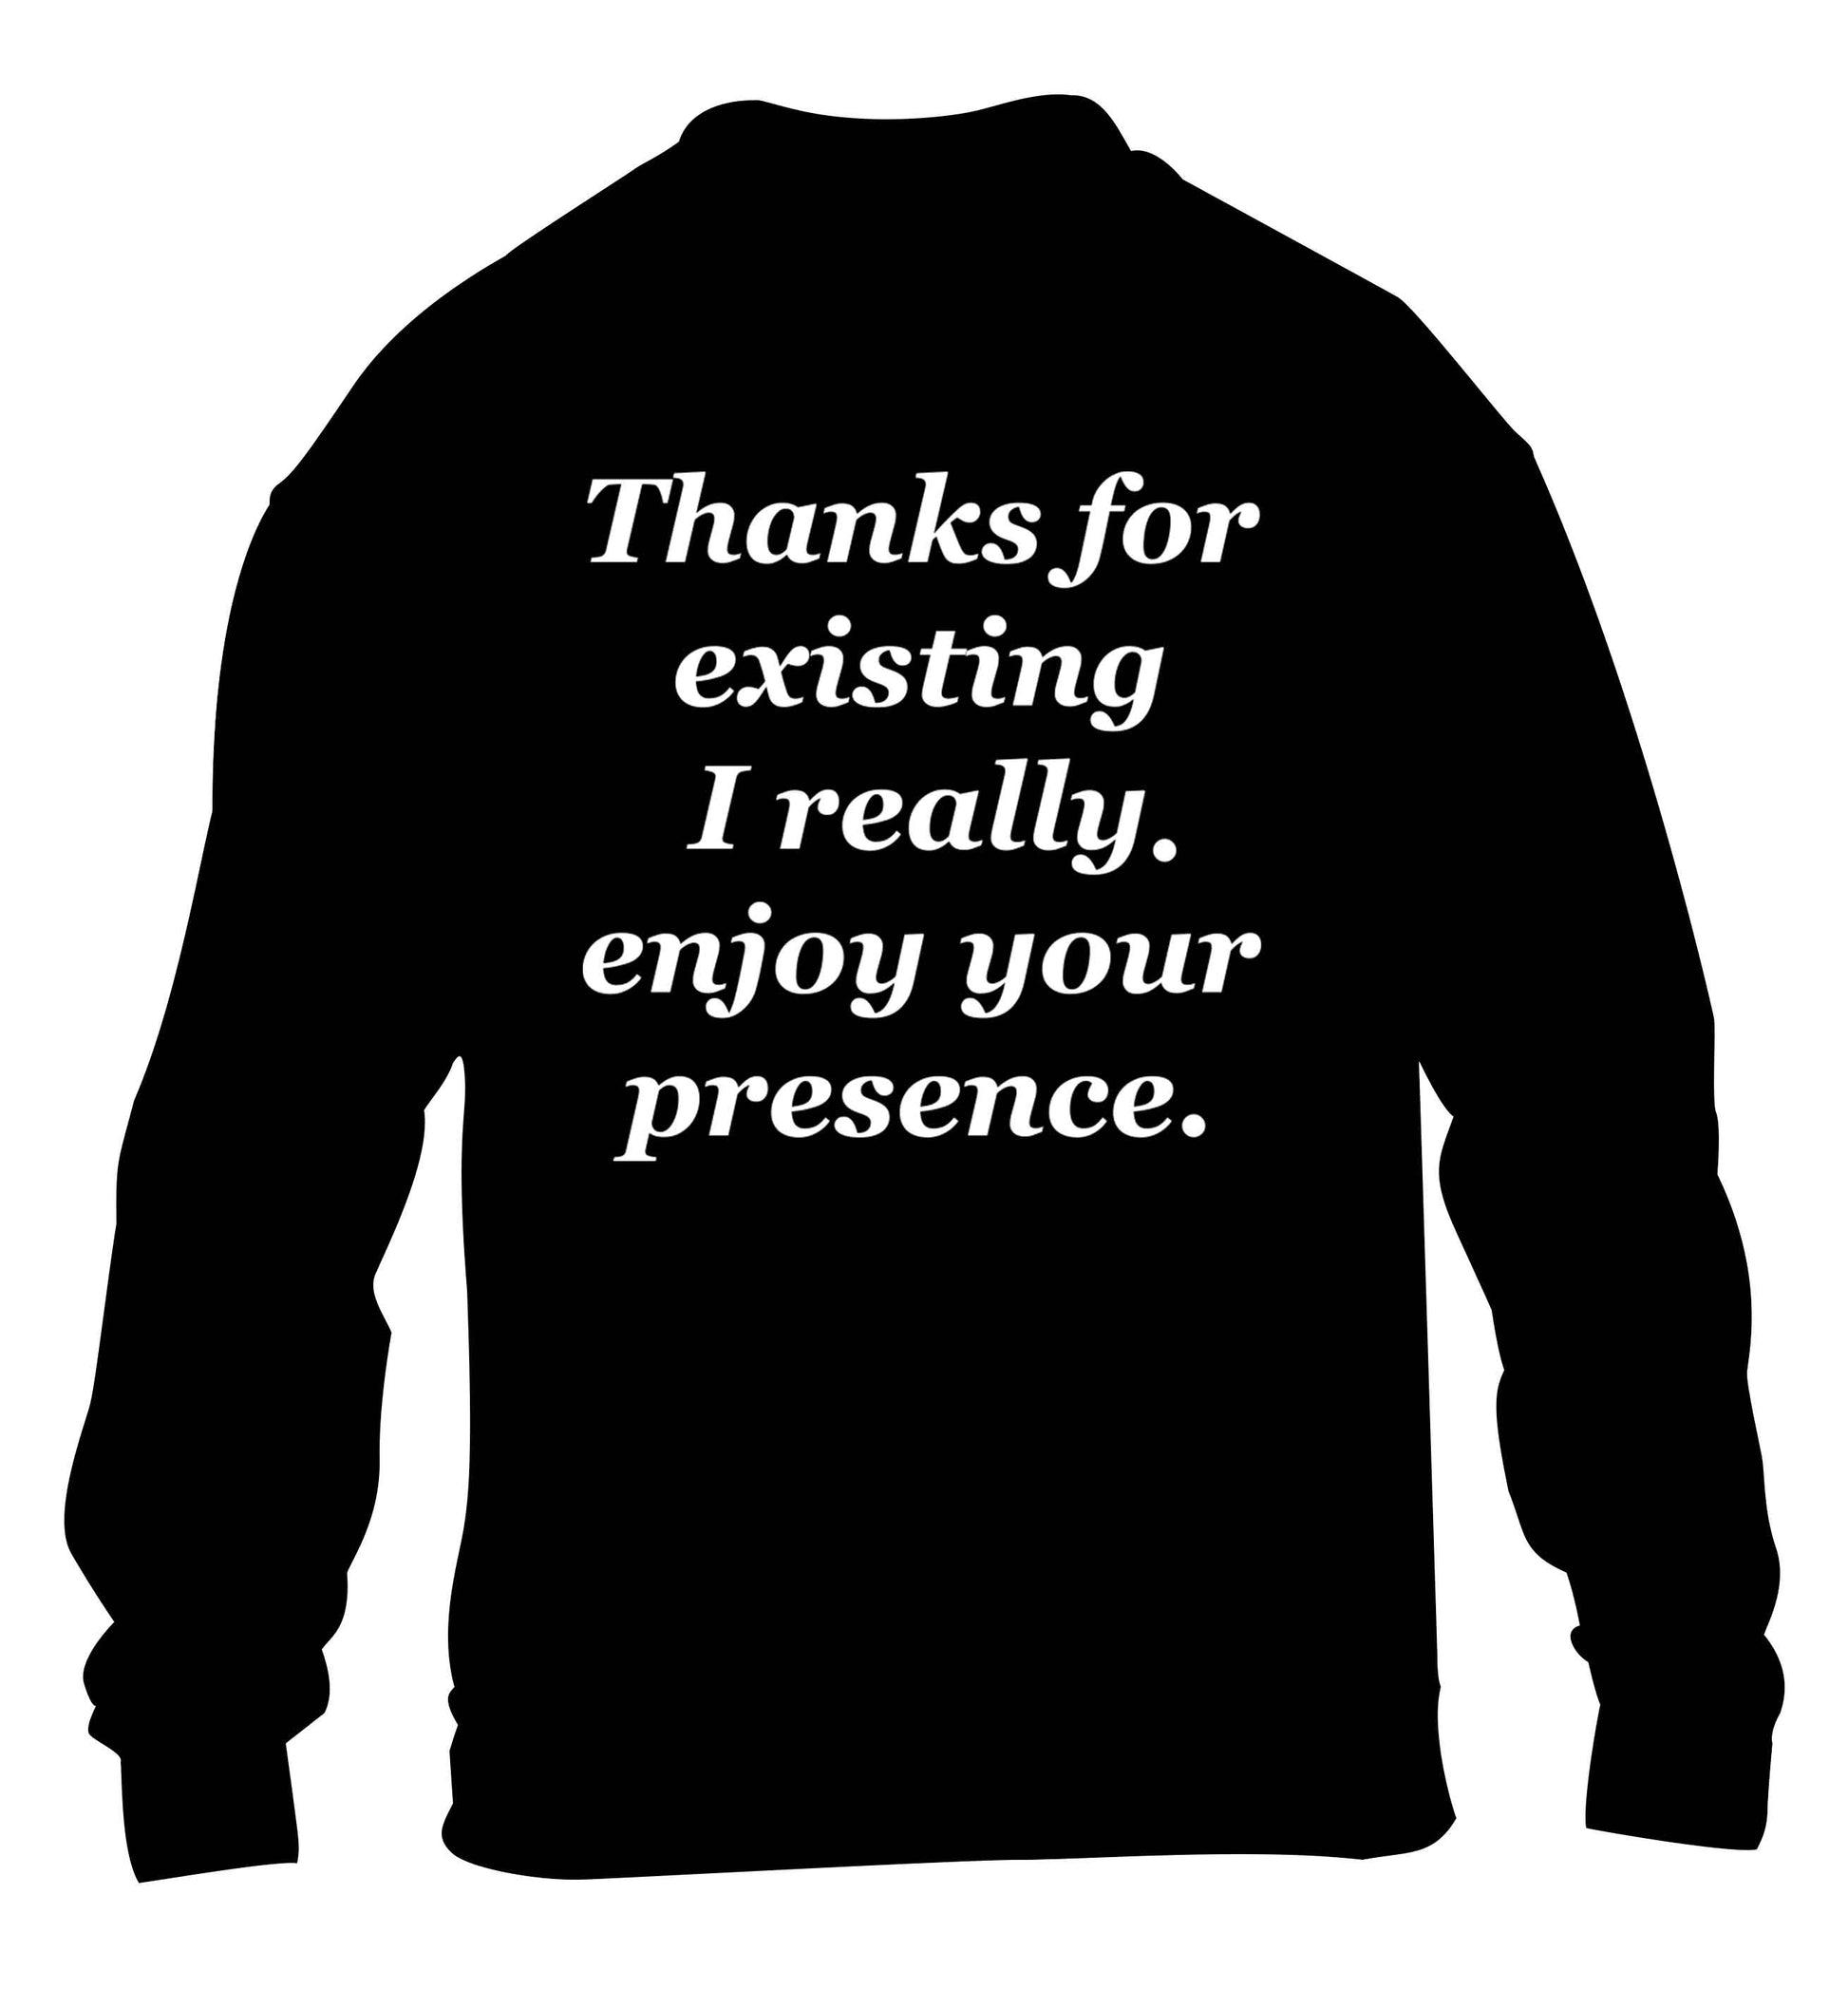 Thanks for existing I really enjoy your presence children's black sweater 12-13 Years